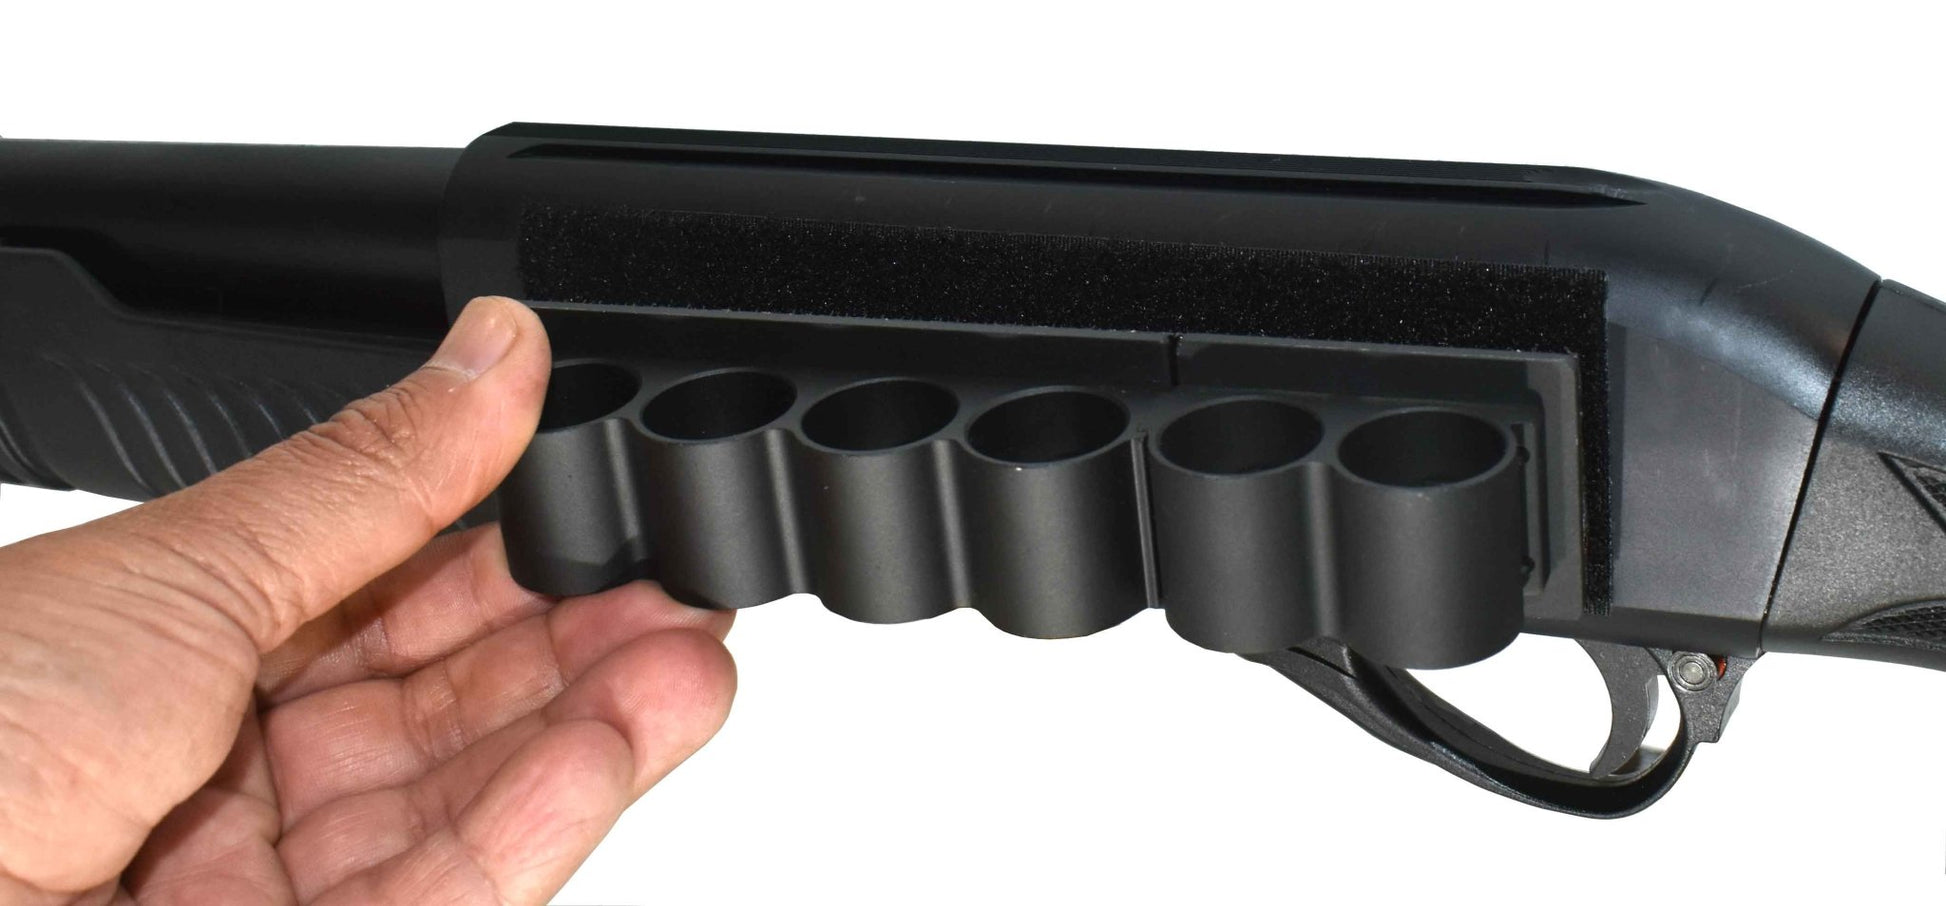 Trinity Aluminum Shell Holder Compatible With Remington 870 12 Gauge Pump. - TRINITY SUPPLY INC